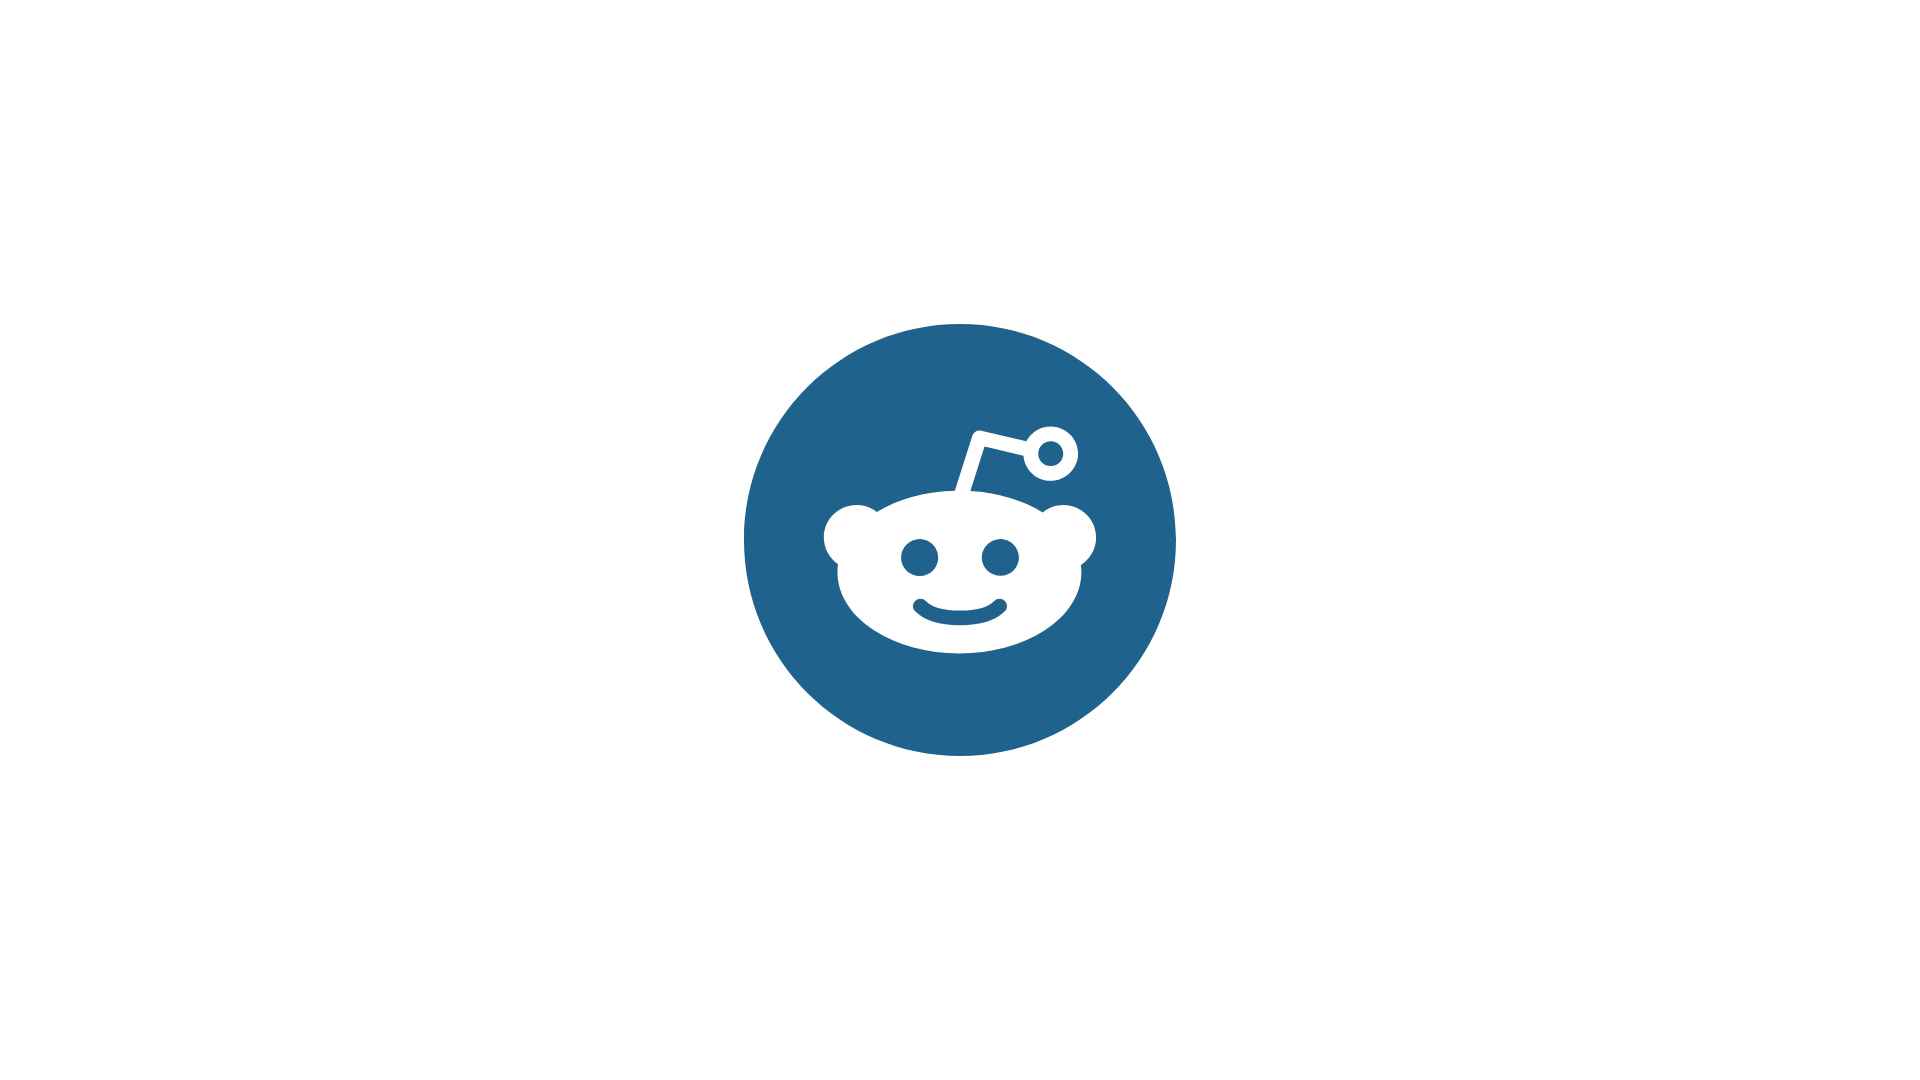 Is it possible to have multiple accounts on Reddit?